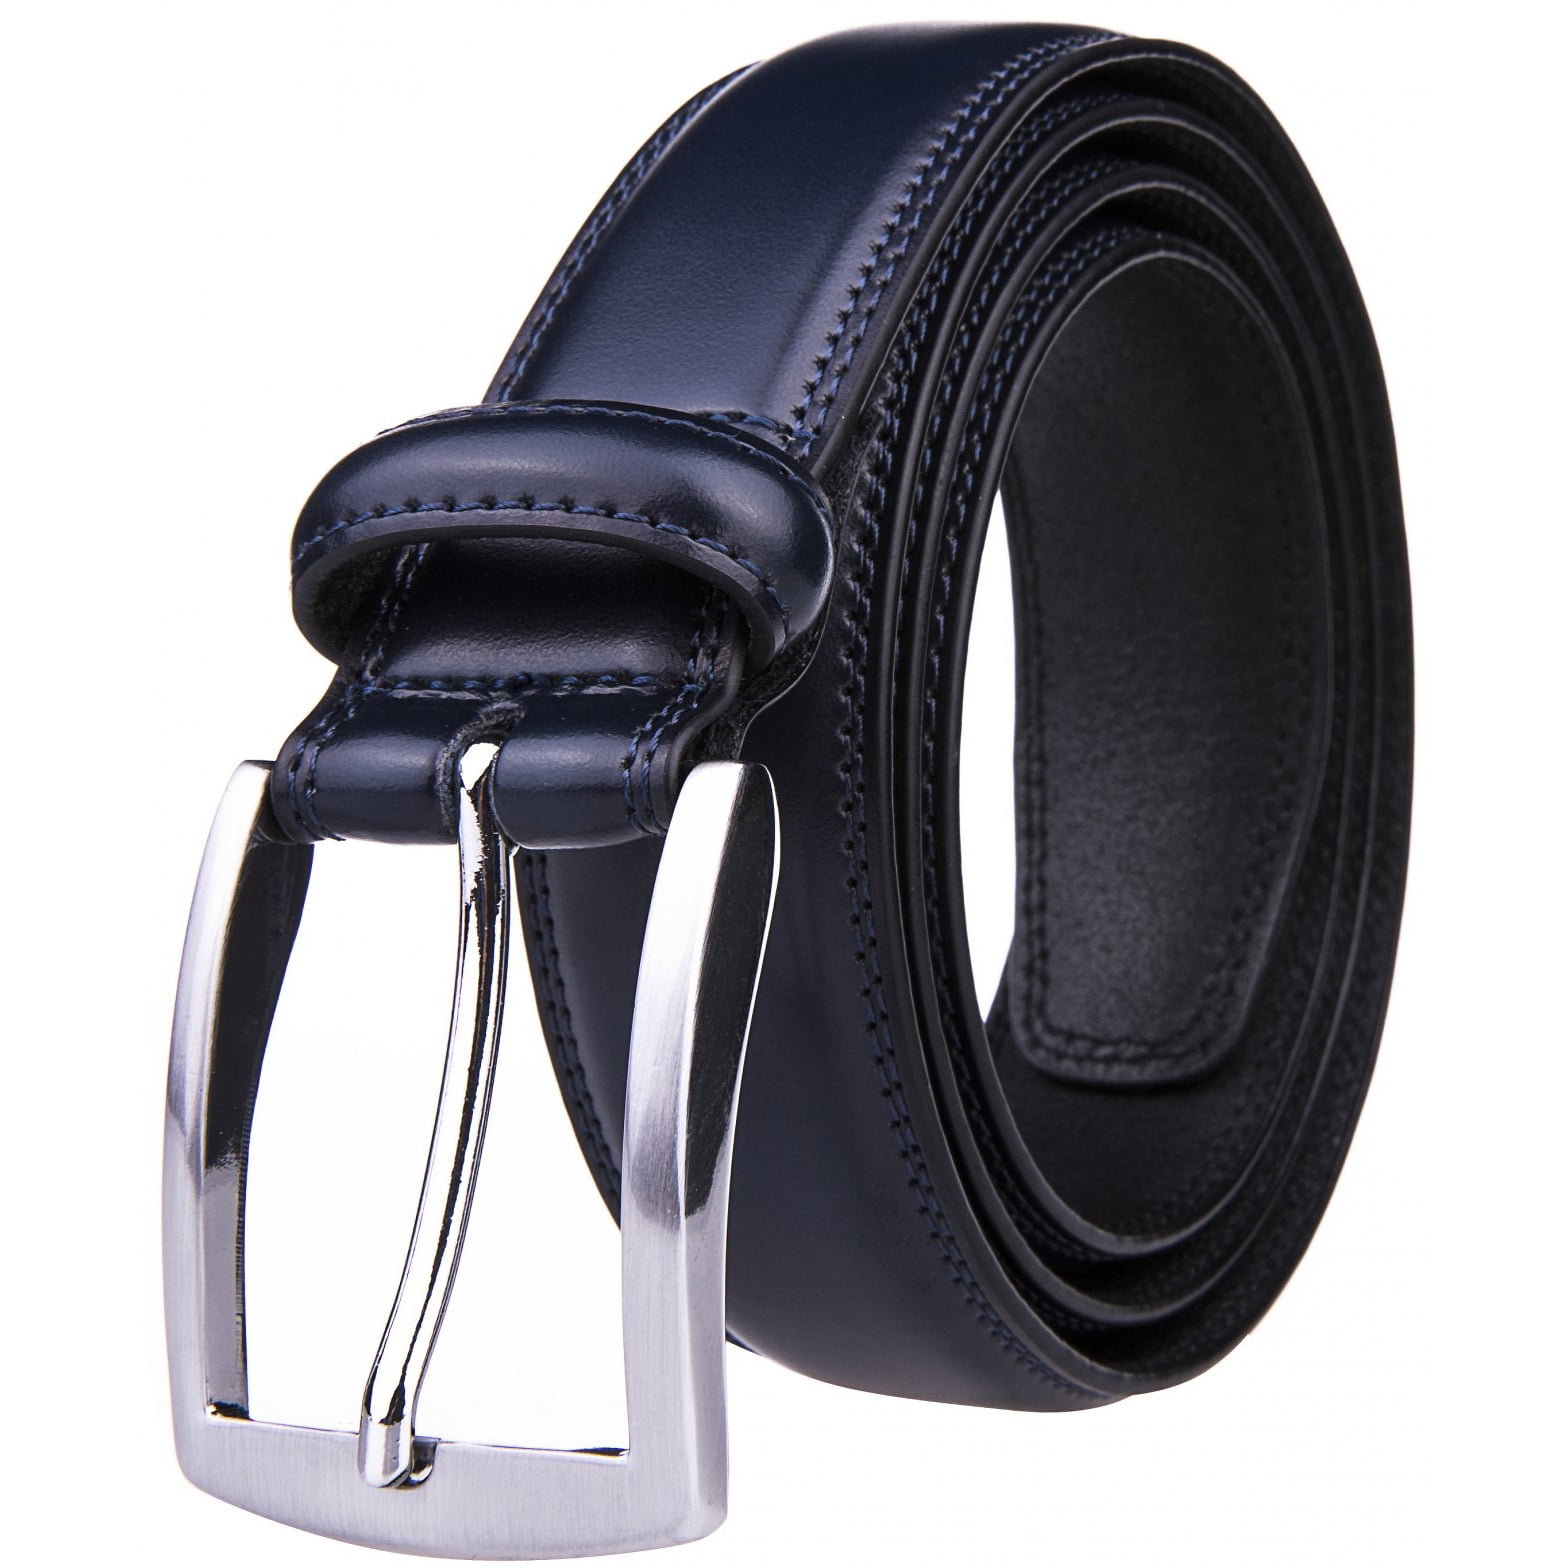 Dress Belts For Men, 1.25-inch Wide Classic Real Leather Belt - Navy ...